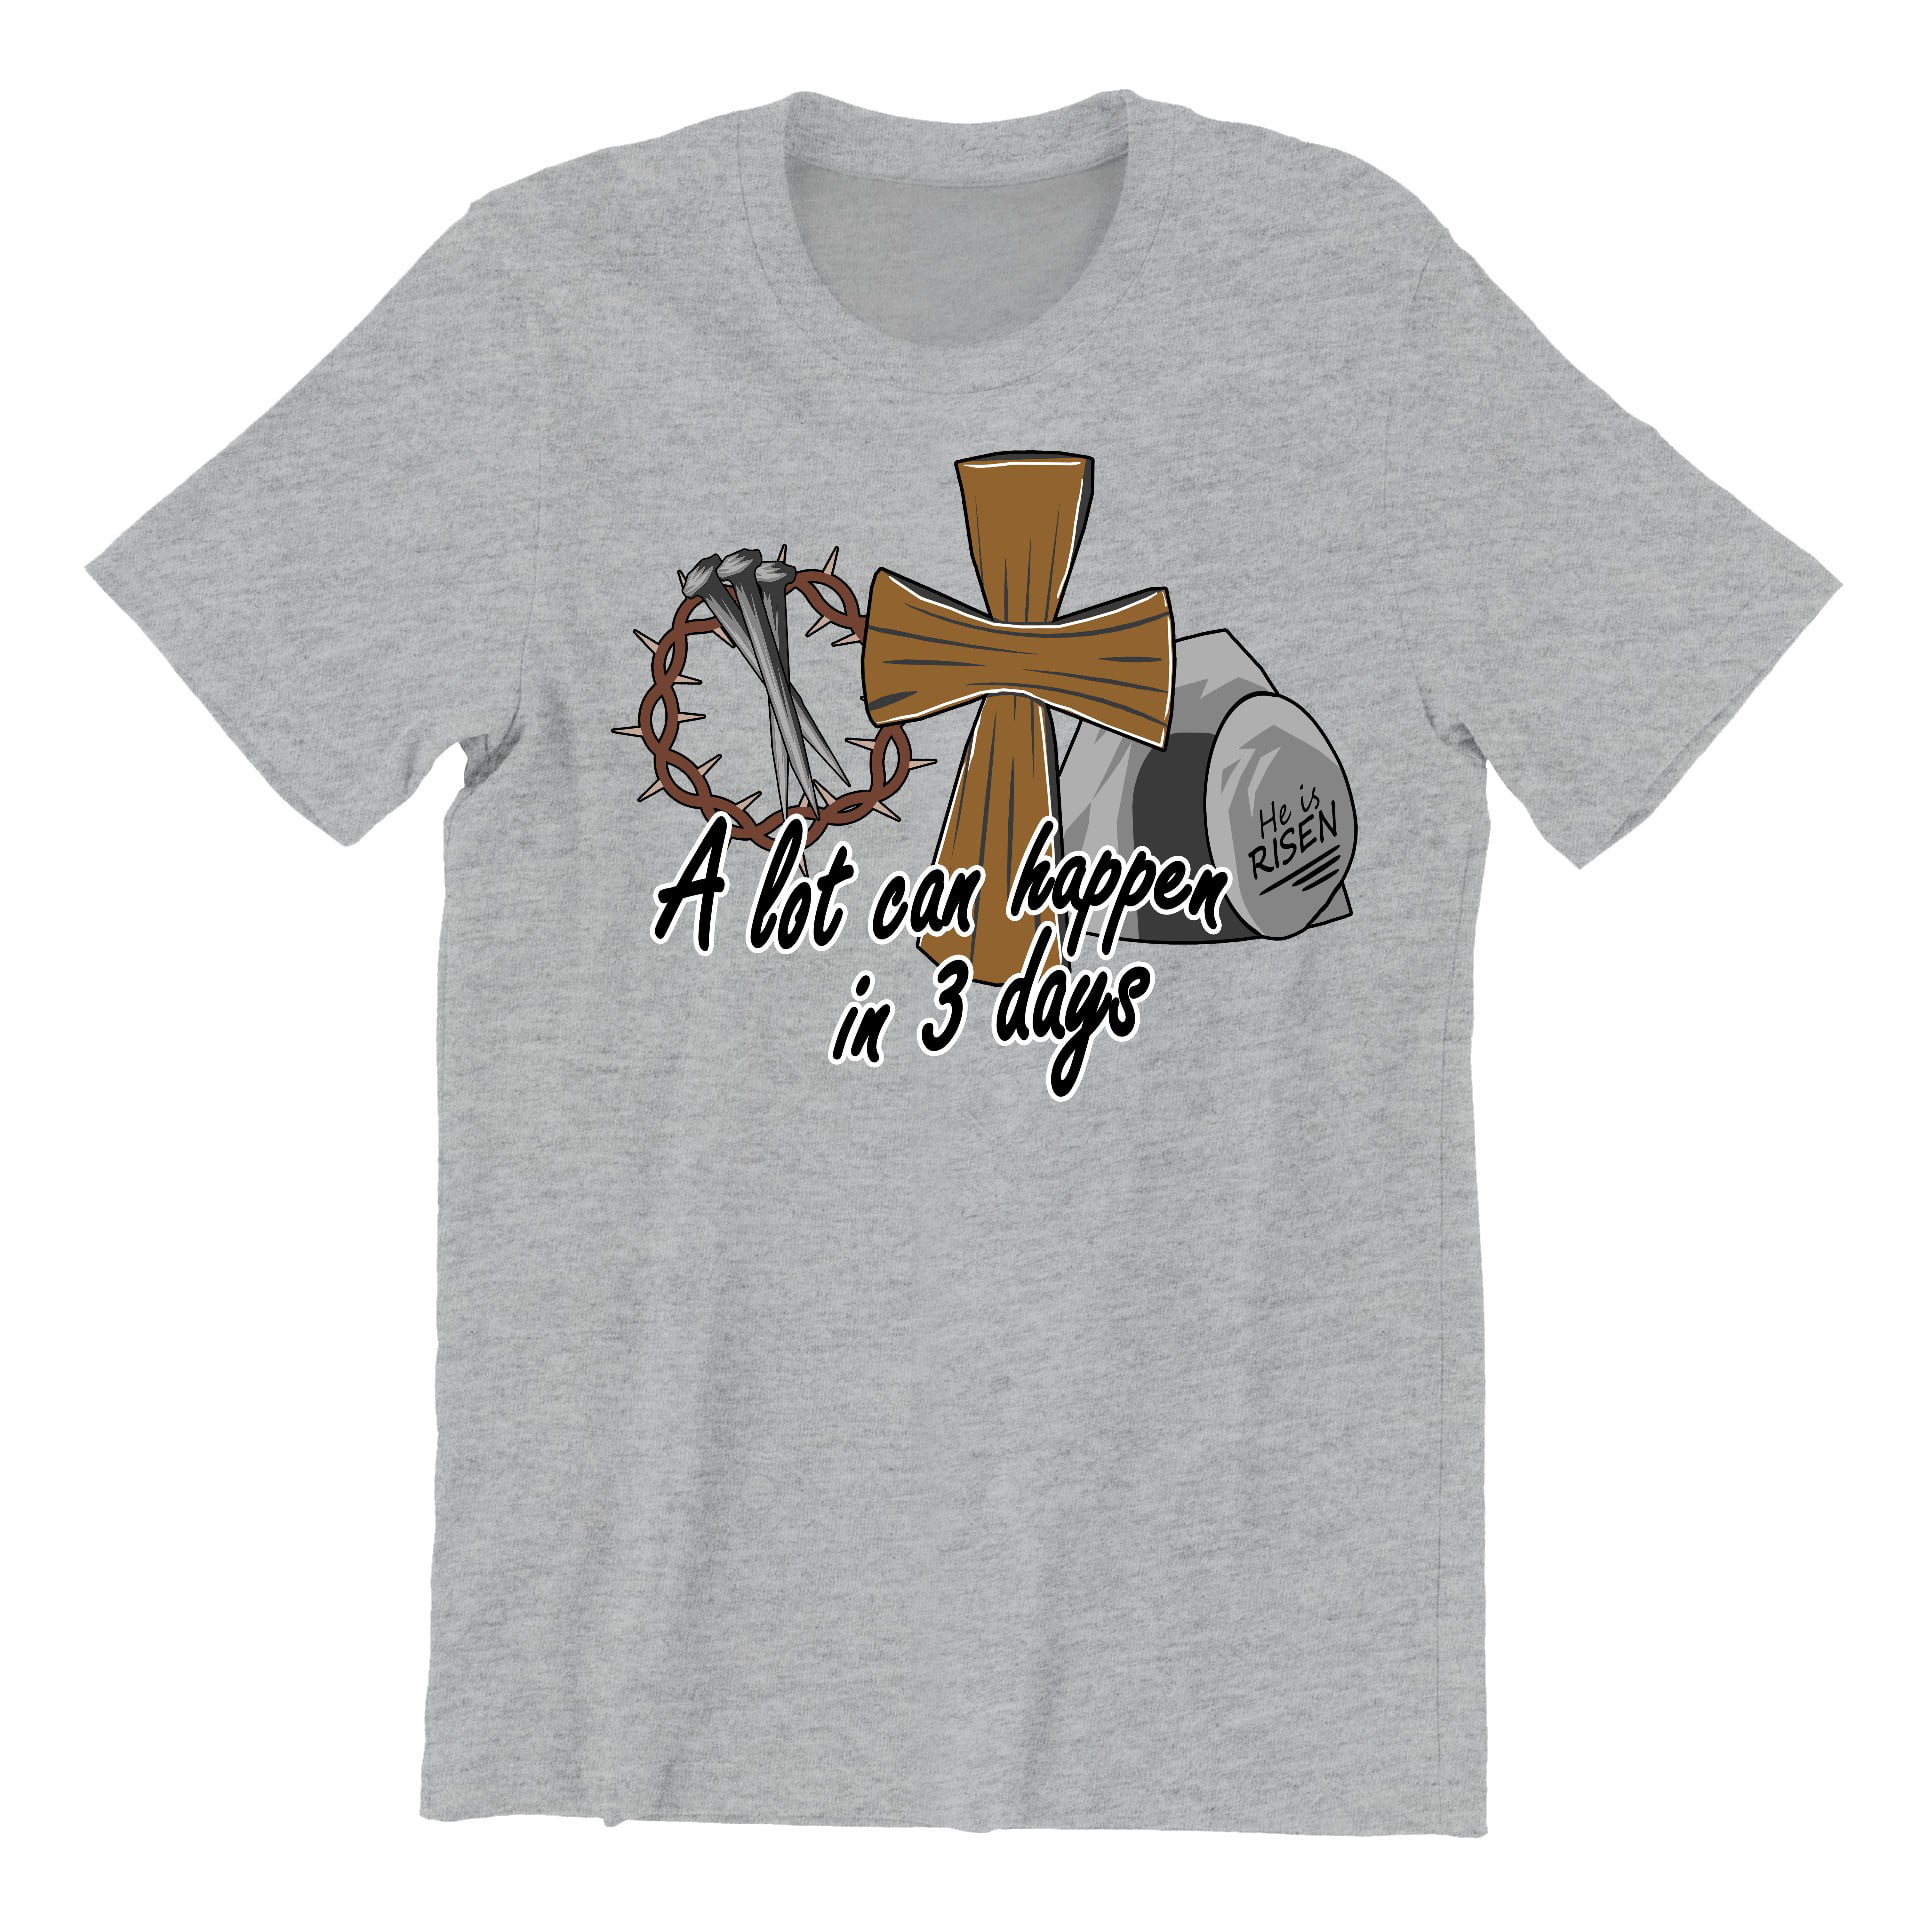 A Lot Can Happen in 3 Days He is Risen Christian Easter Church Men's  T-shirt, XL, White